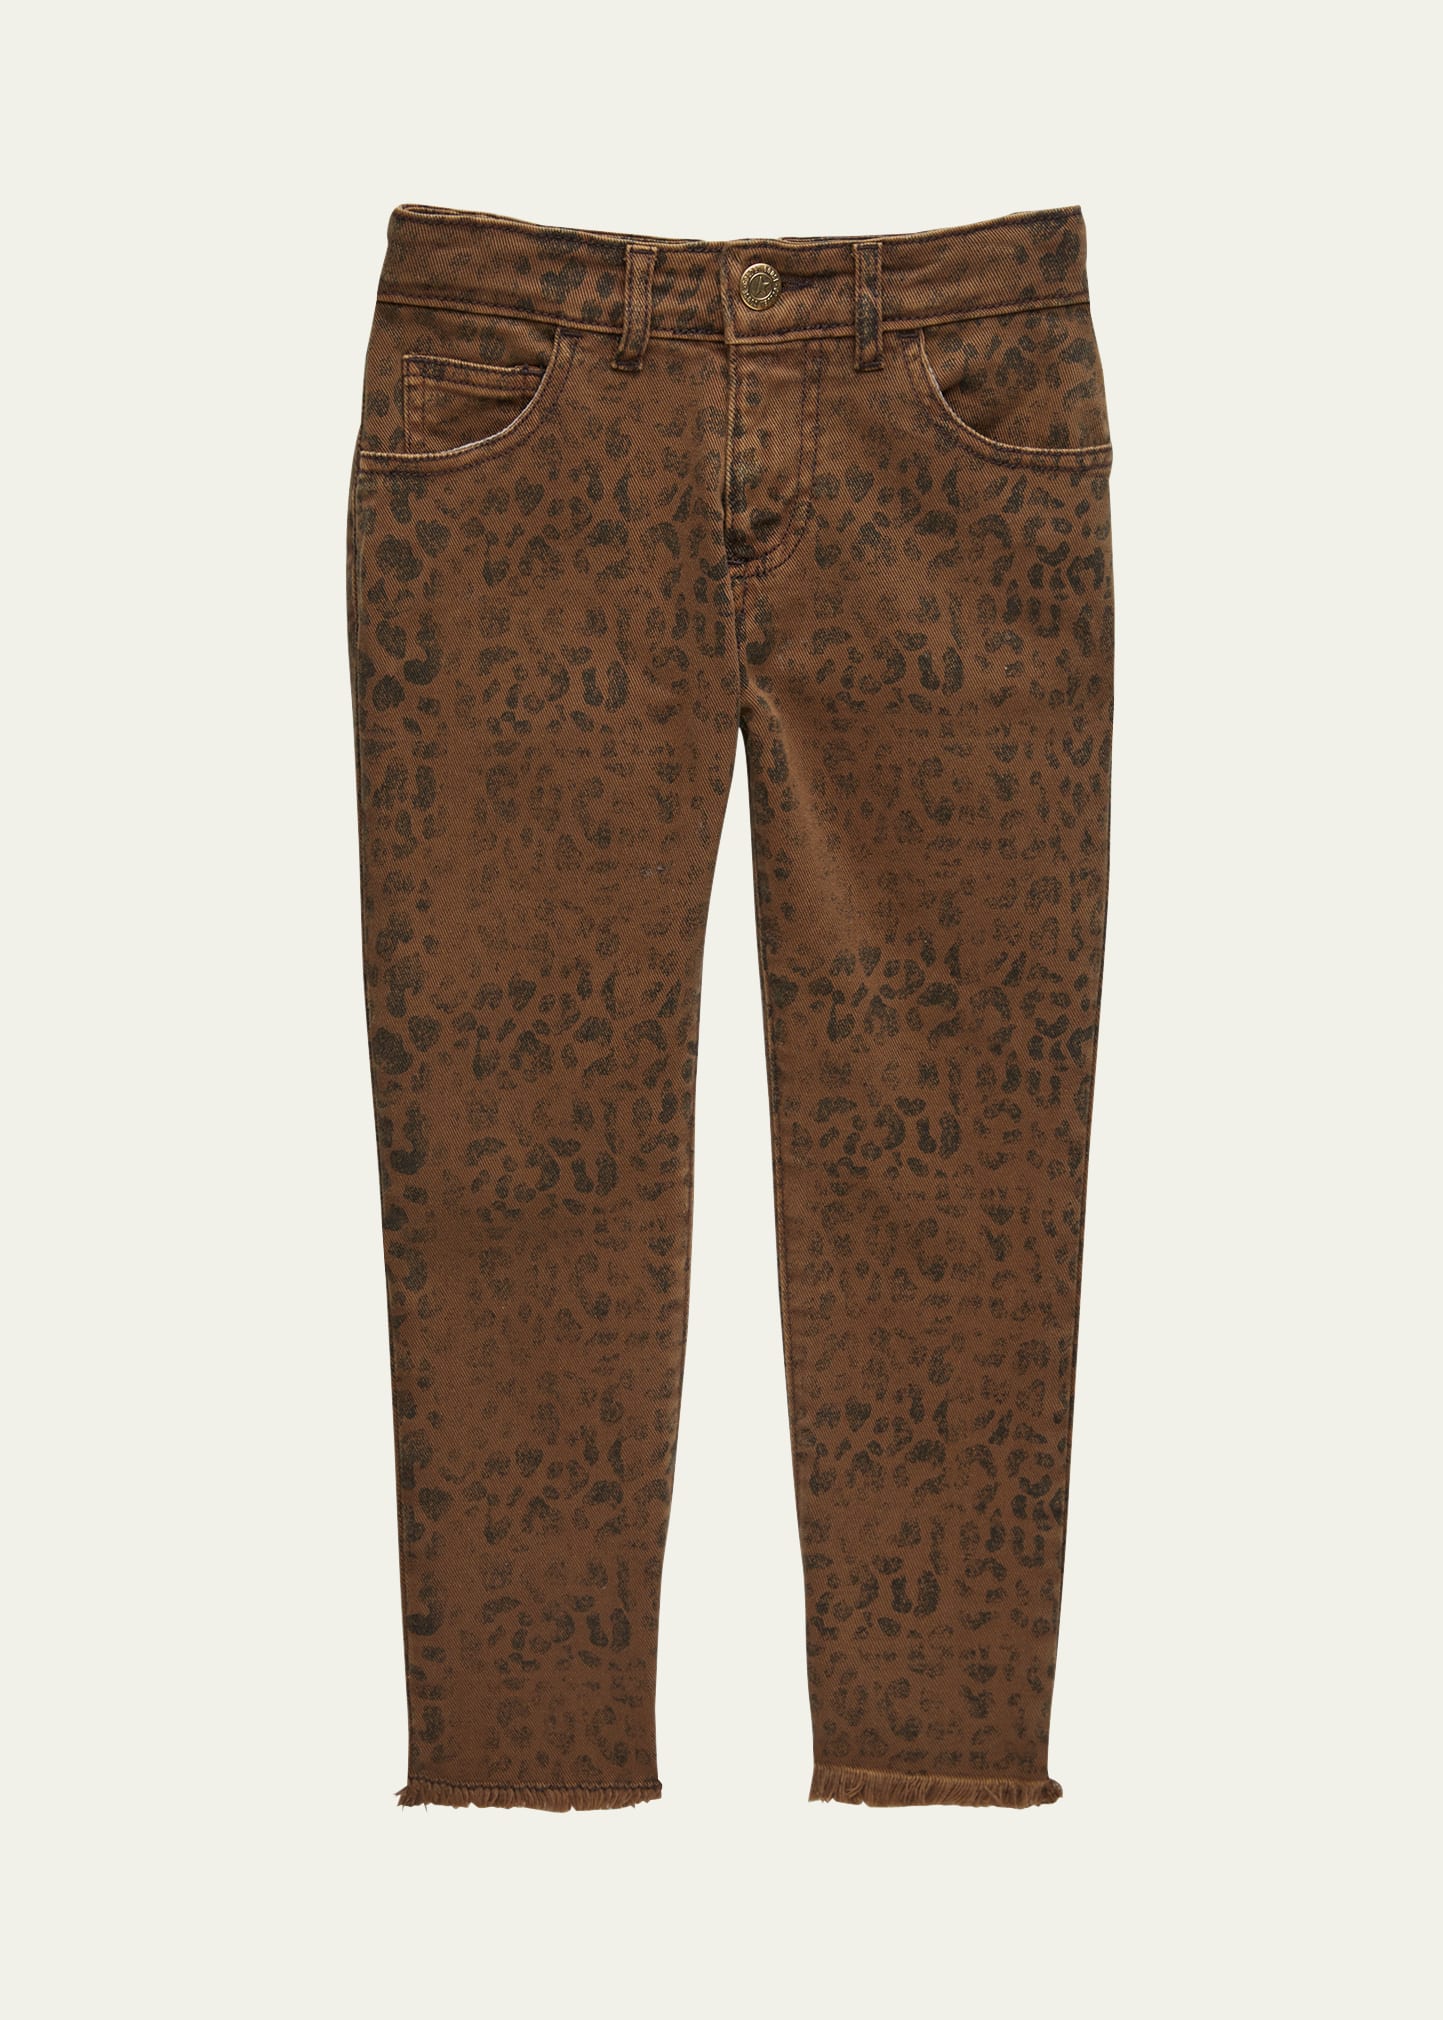 Golden Goose Girl's Faded Leopard-Print Jeans, Size 4-10